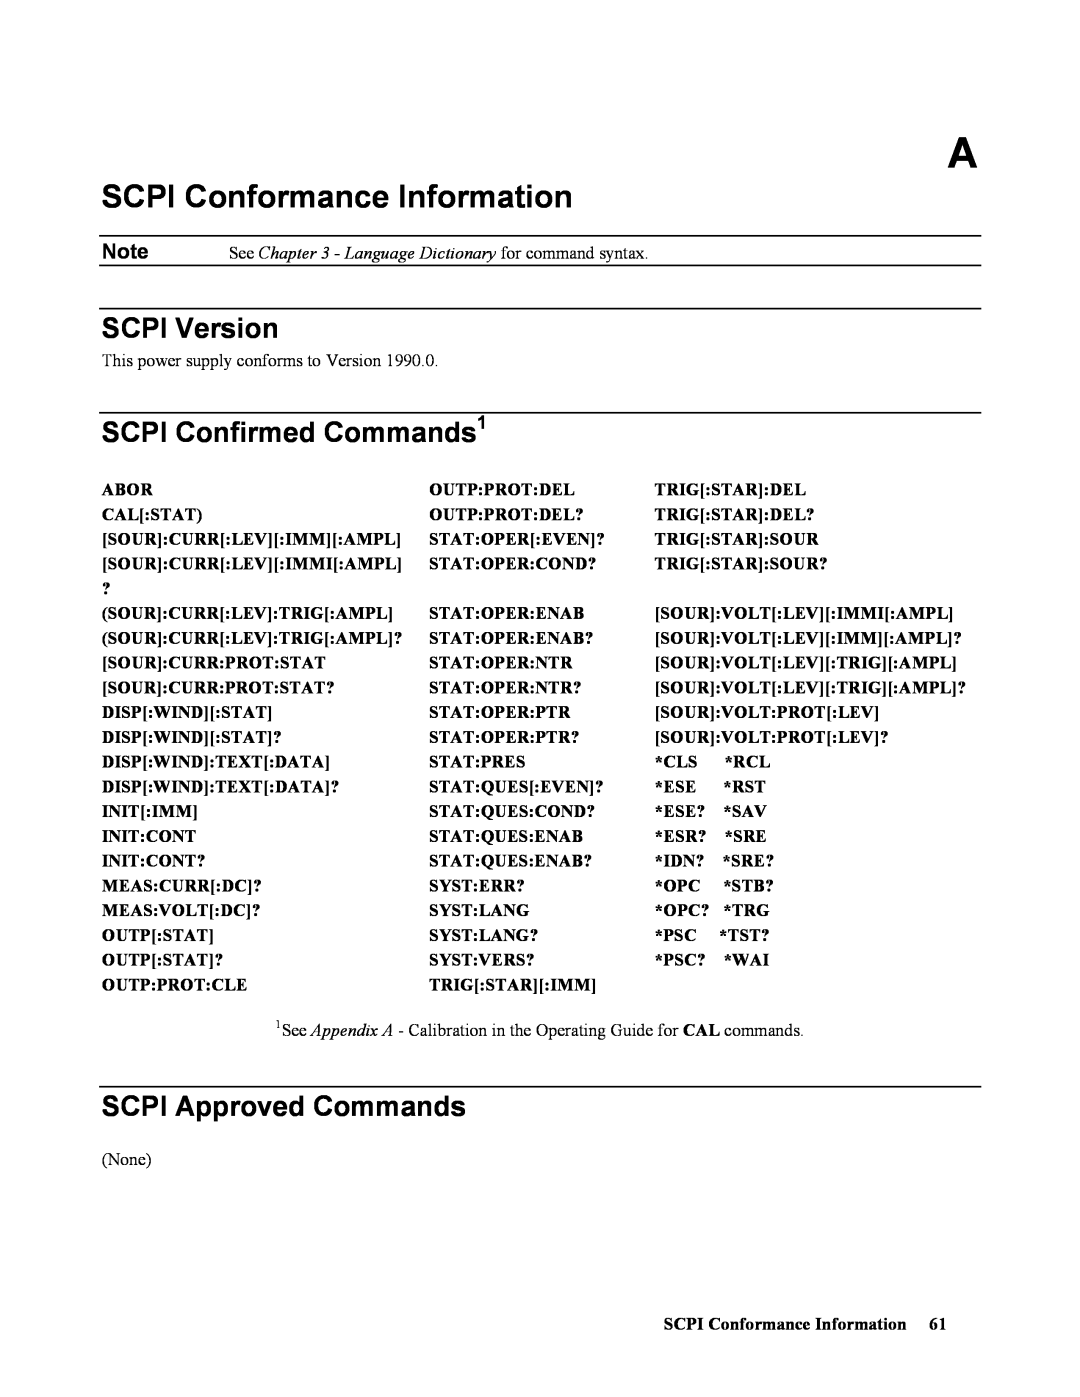 Agilent Technologies 664xA SCPI Conformance Information, SCPI Version, SCPI Confirmed Commands1, SCPI Approved Commands 